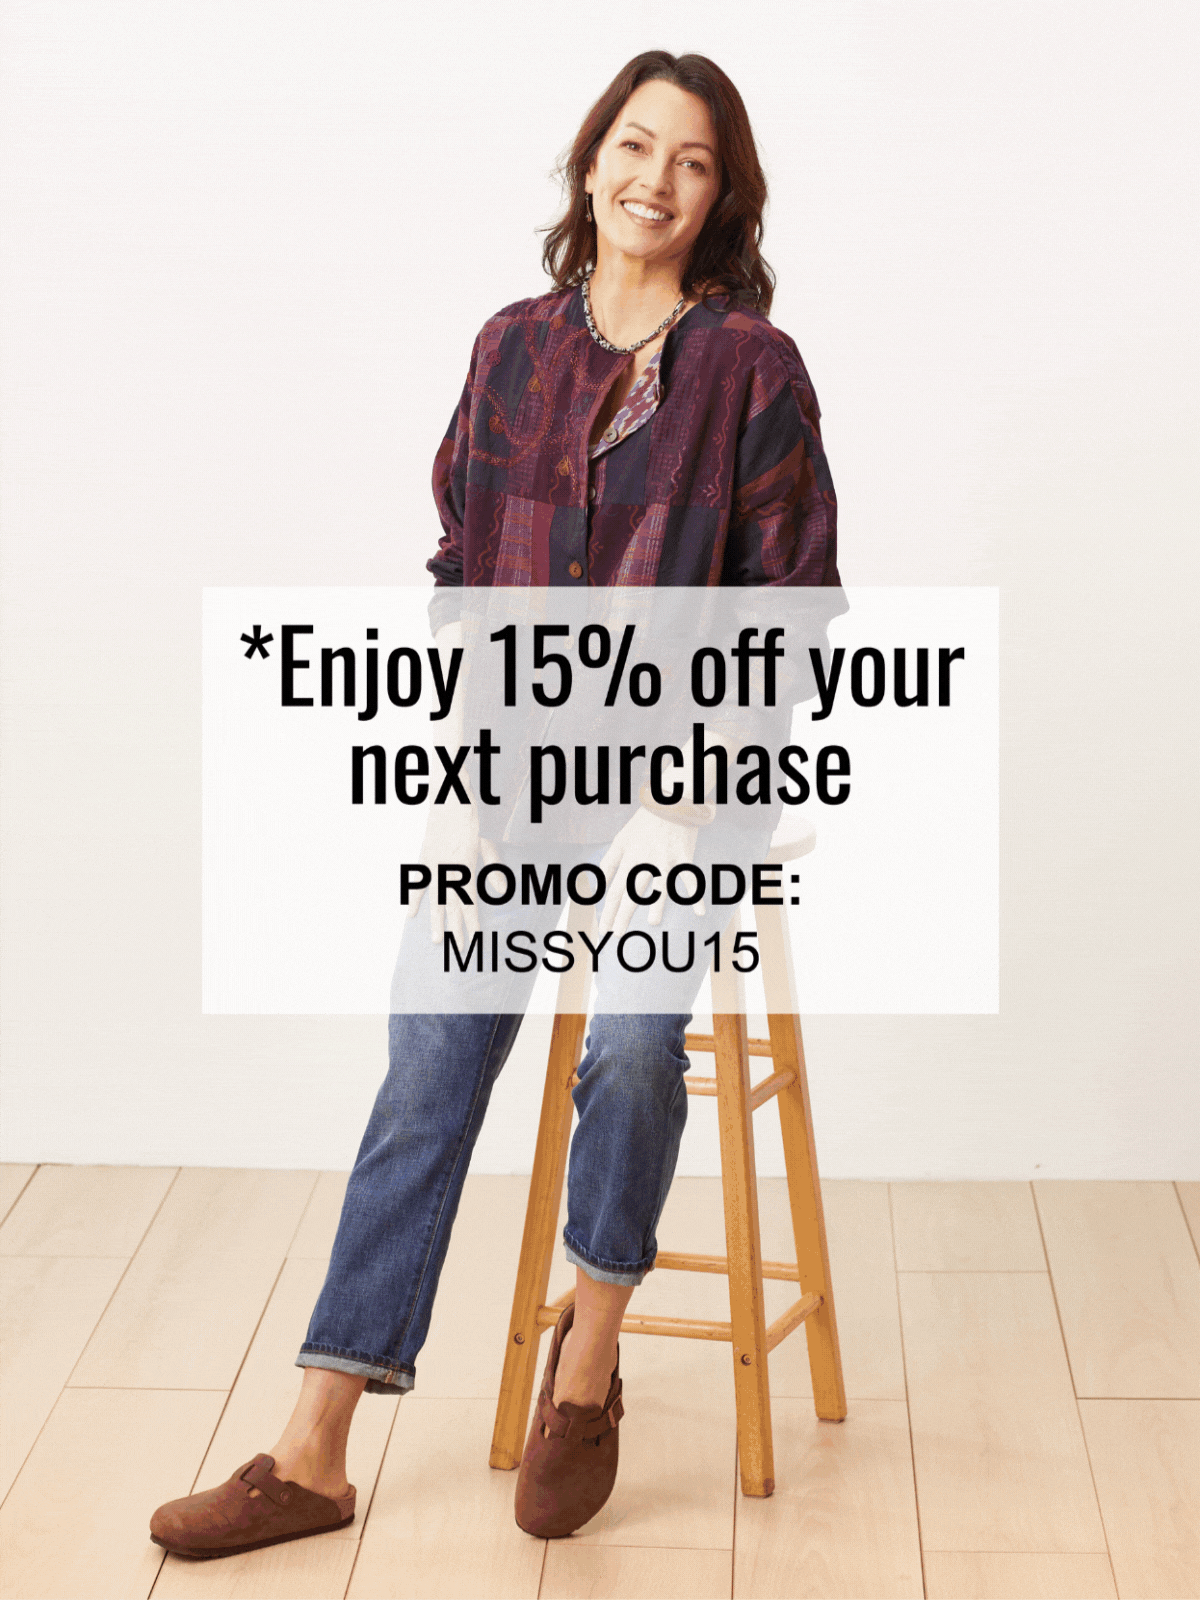 *Enjoy 15% off your next purchase PROMO CODE: MISSYOU 15